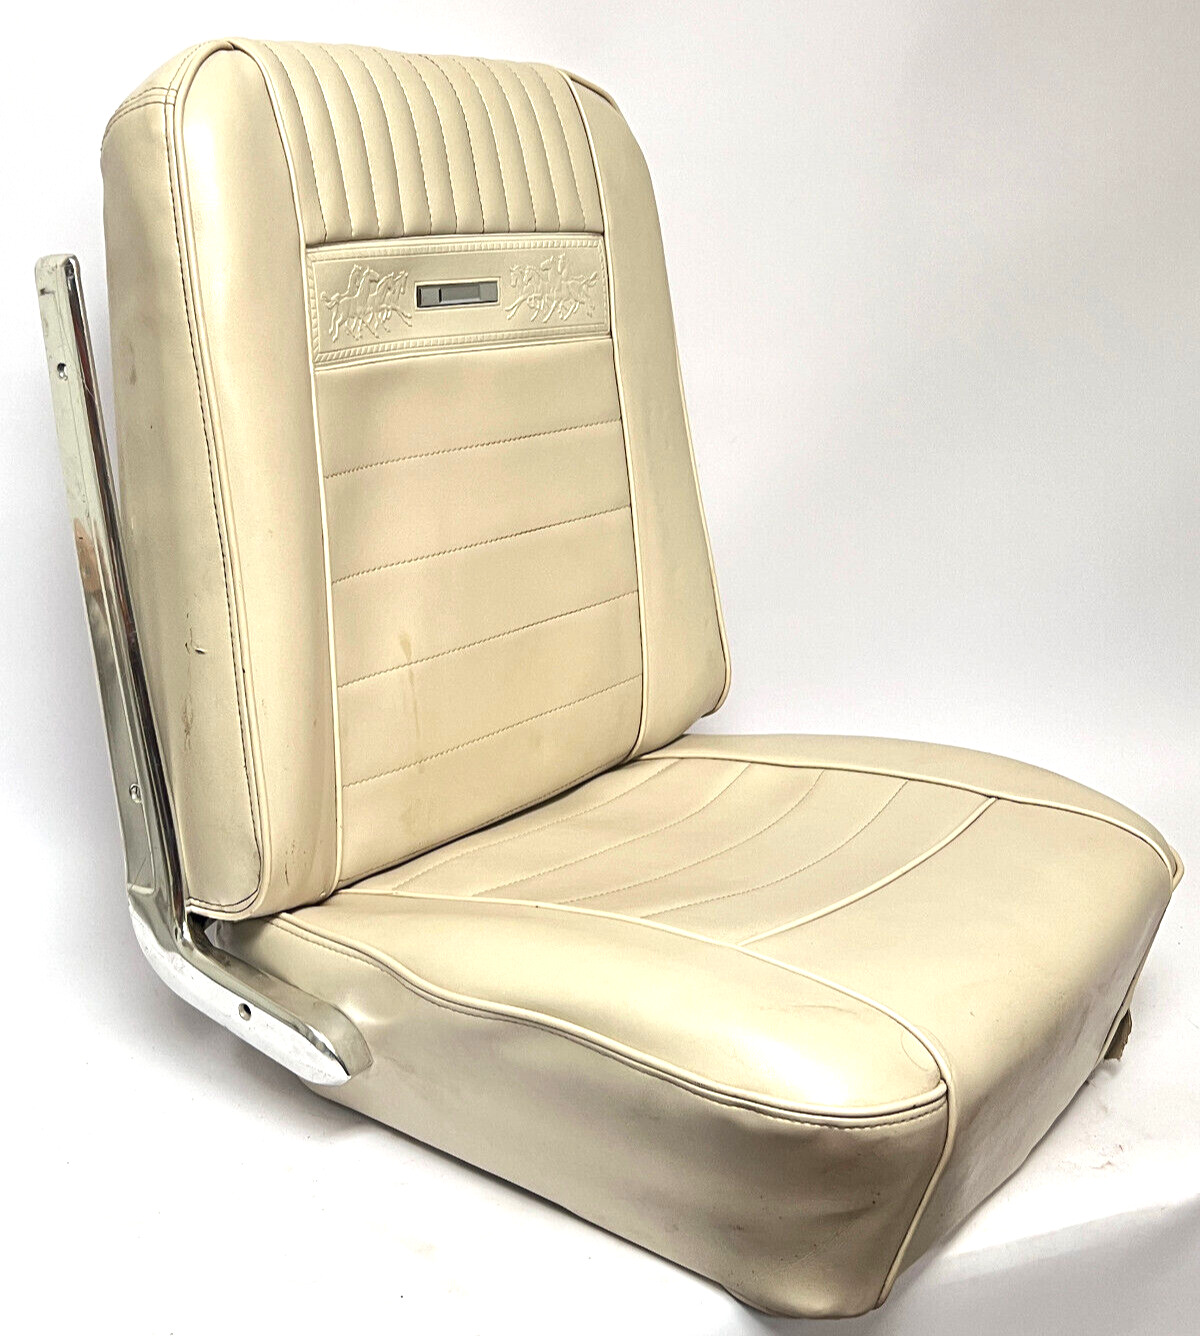 1965 1966 Mustang Deluxe Pony Front PSNGR Bucket Seat, Cream White, OEM Complete